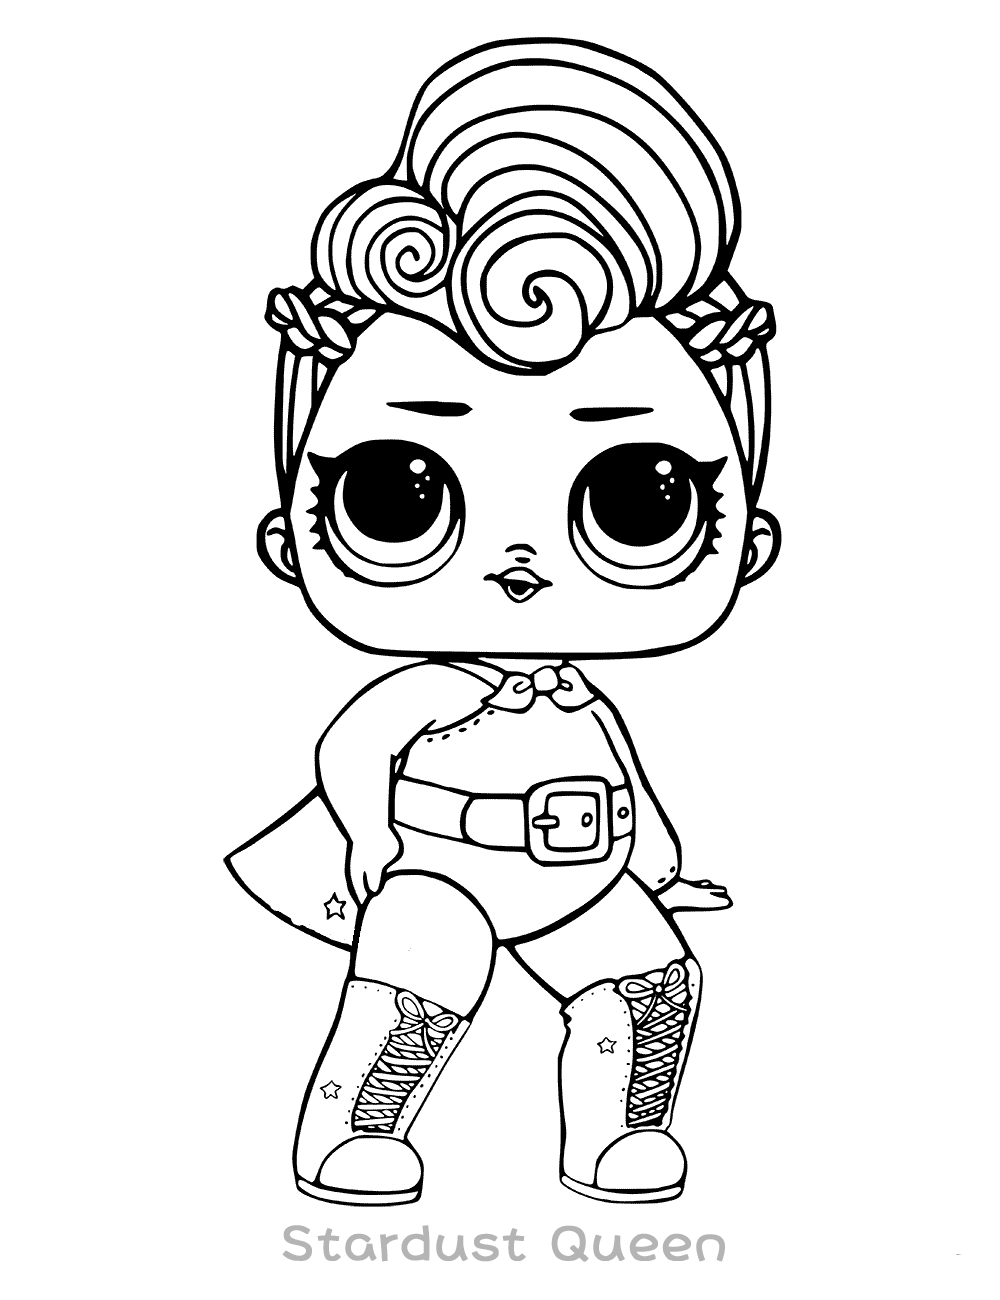 Stardust Queen Lol Doll Coloring Page